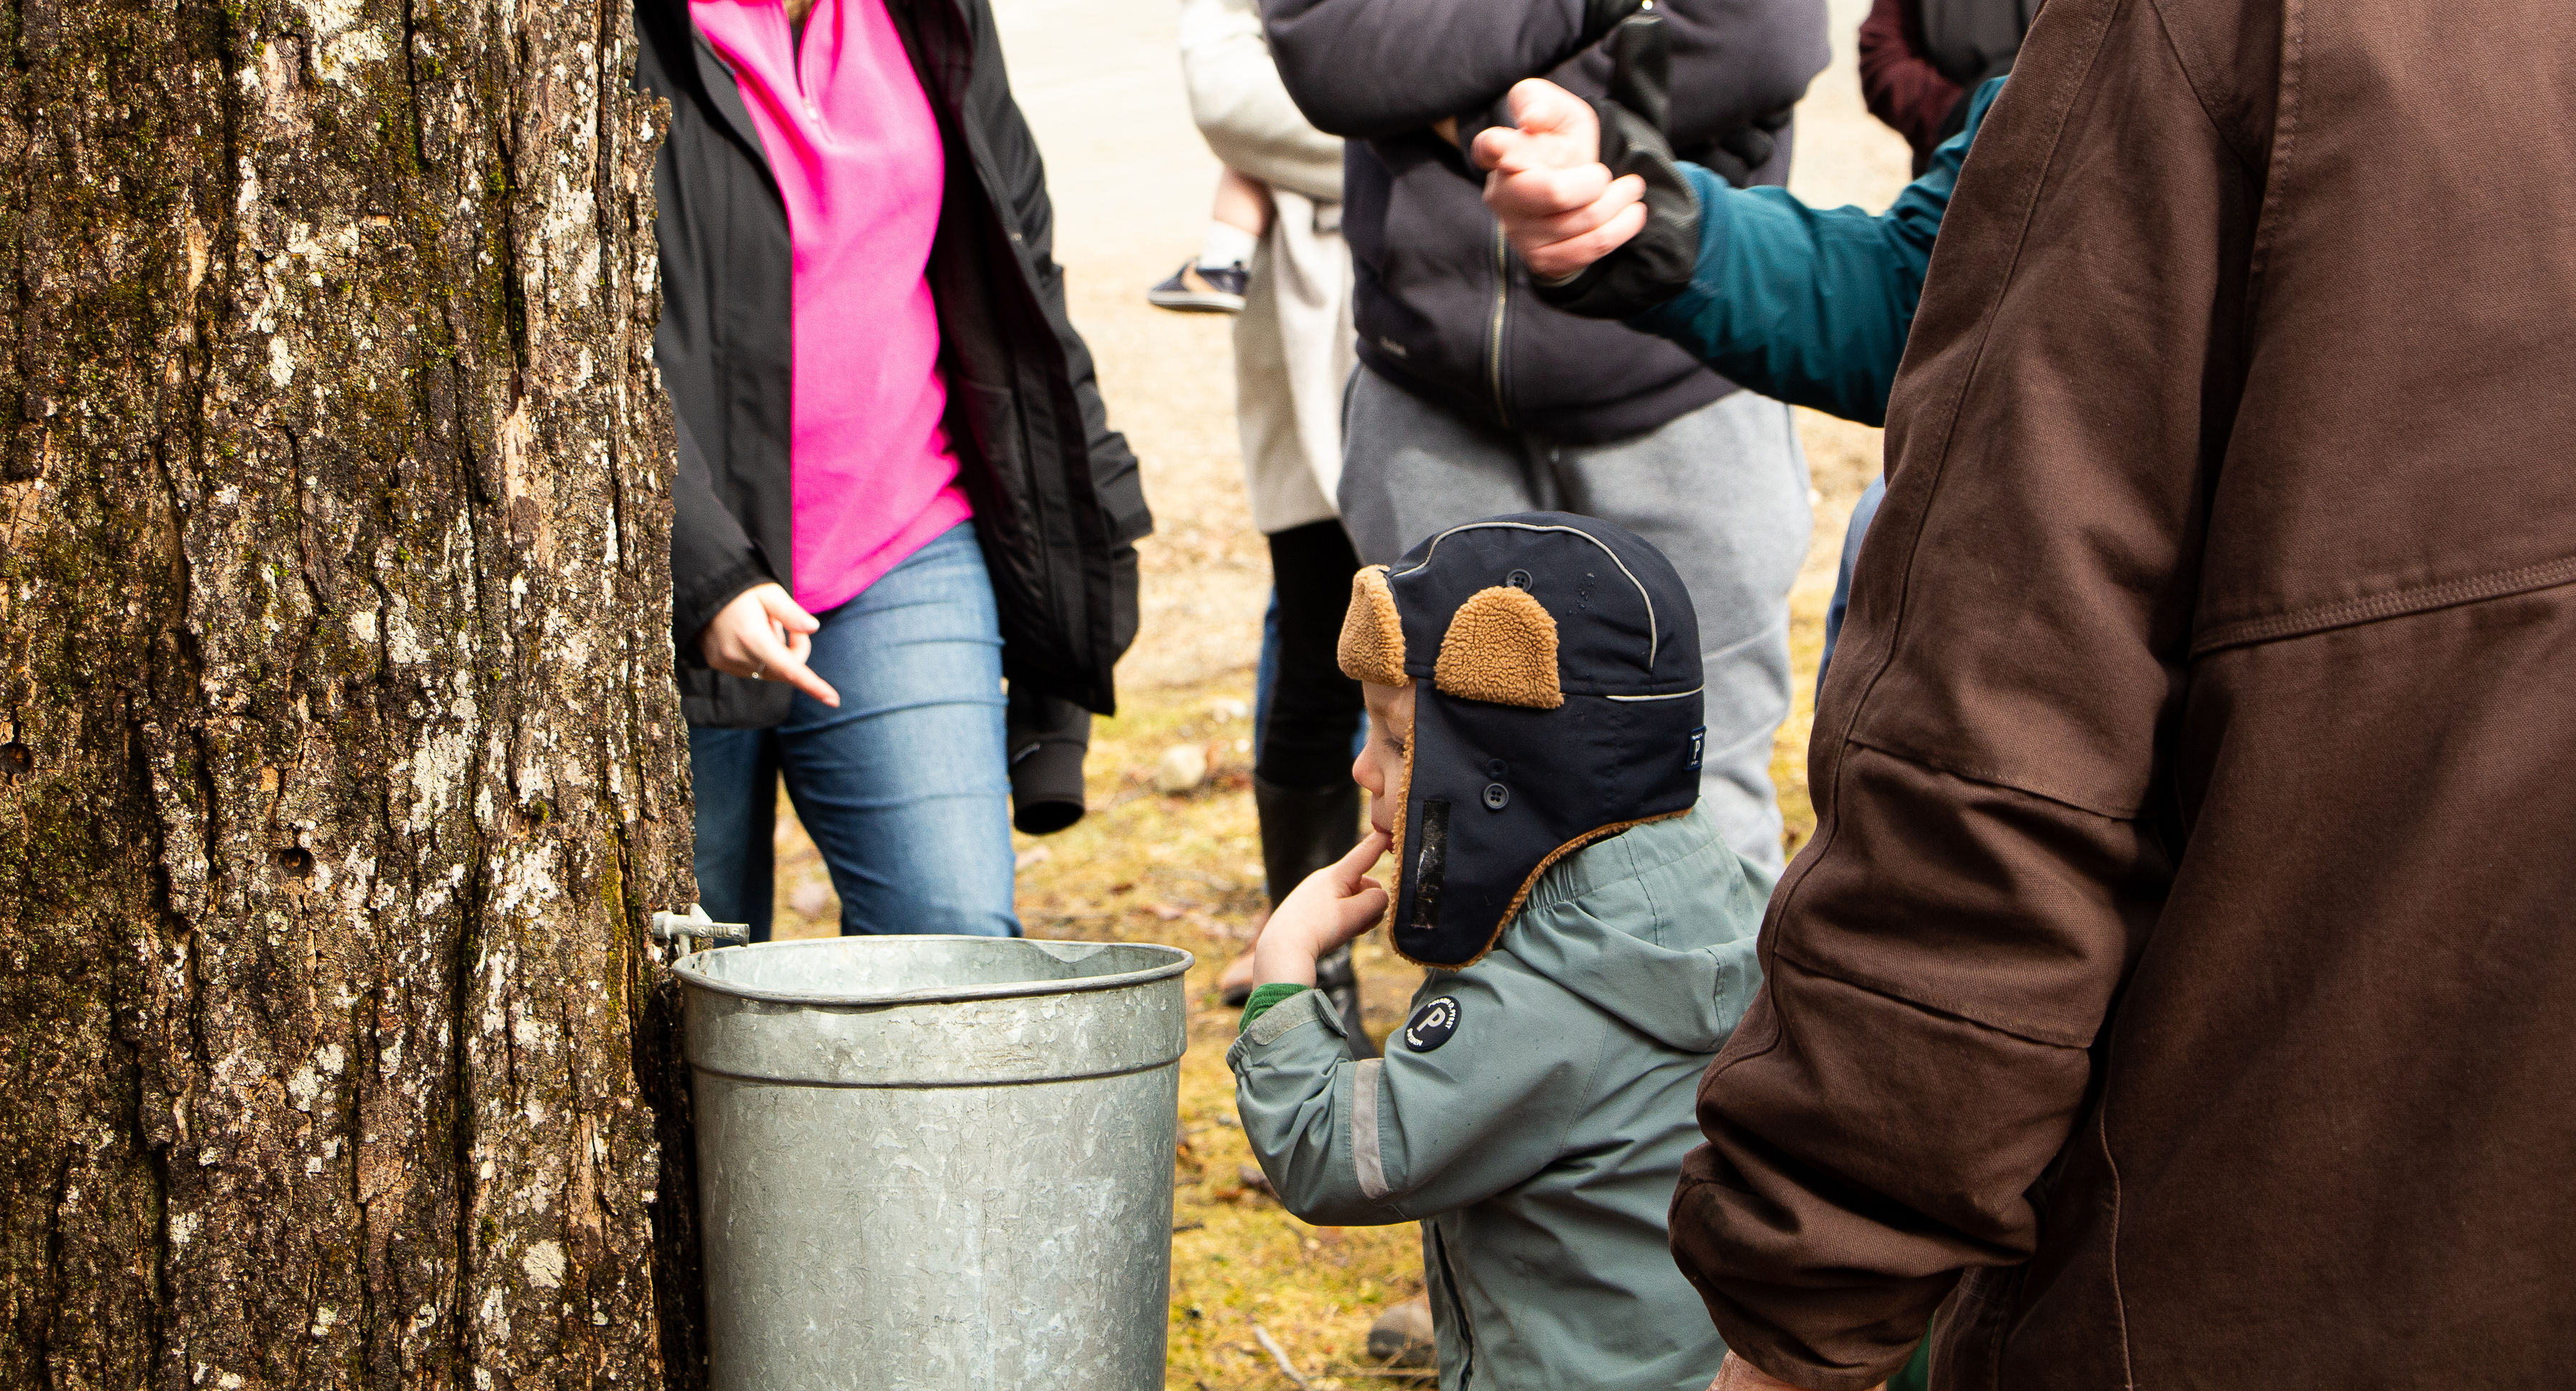 A child tastes sap from the tree.